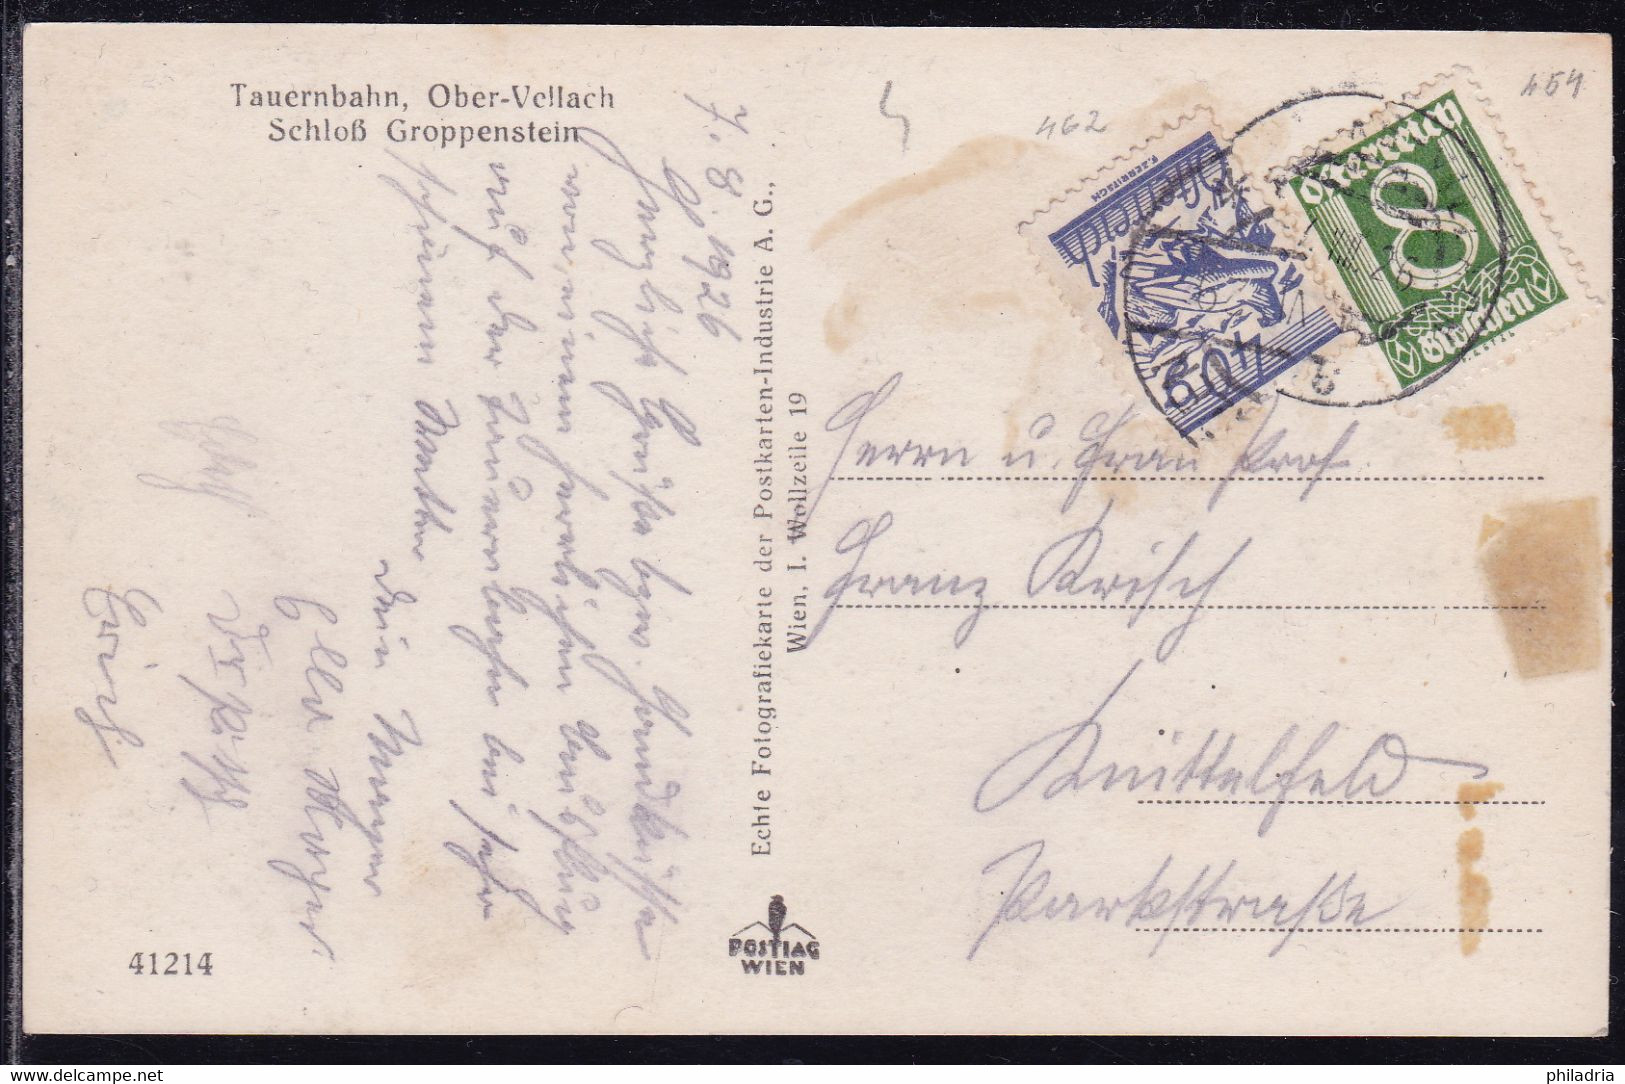 Obervellach, Castle, Mailed 1926 - Obervellach